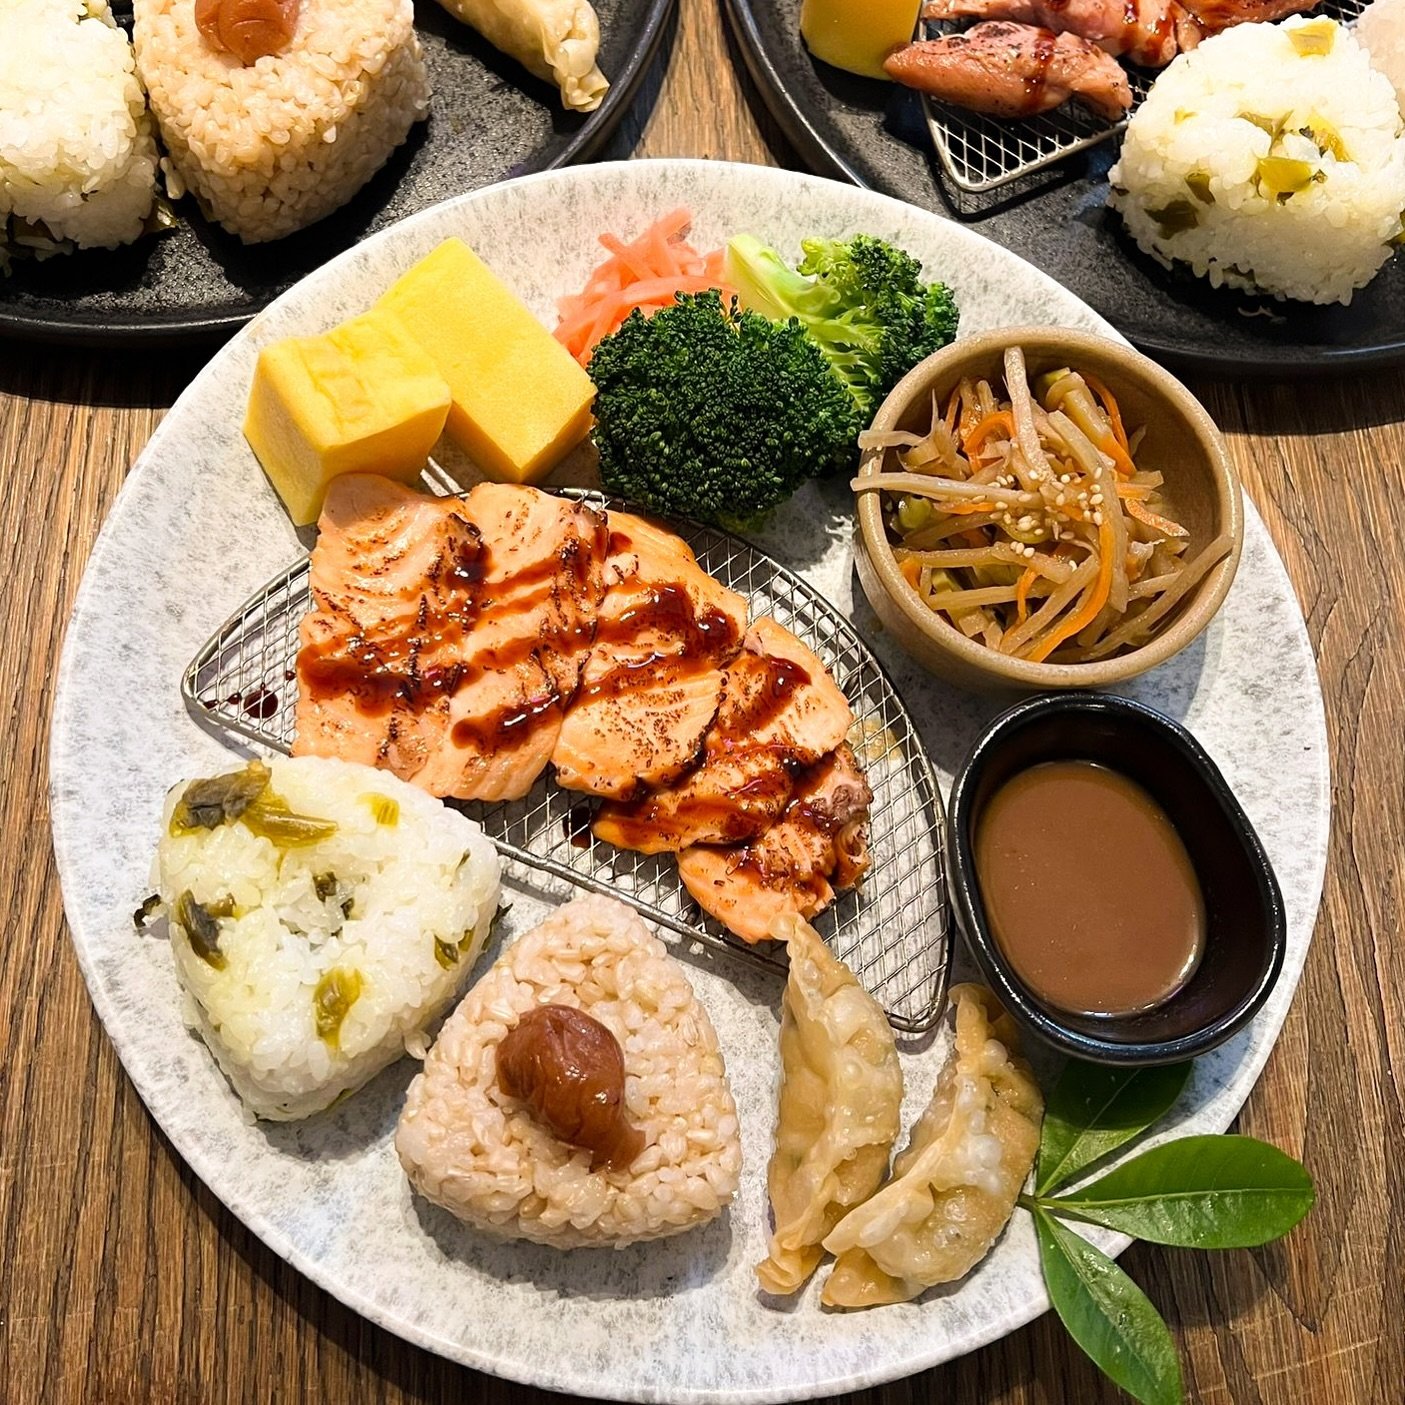 Our all day brunch set with salmon teriyaki 🧡 Come enjoy the sunny London weather with some home-style Japanese food 

#necco #neccolondon #exmouthmarket #islingtonrestaurants #londonfood #londonfoodie #londoneats #everylastmouthful